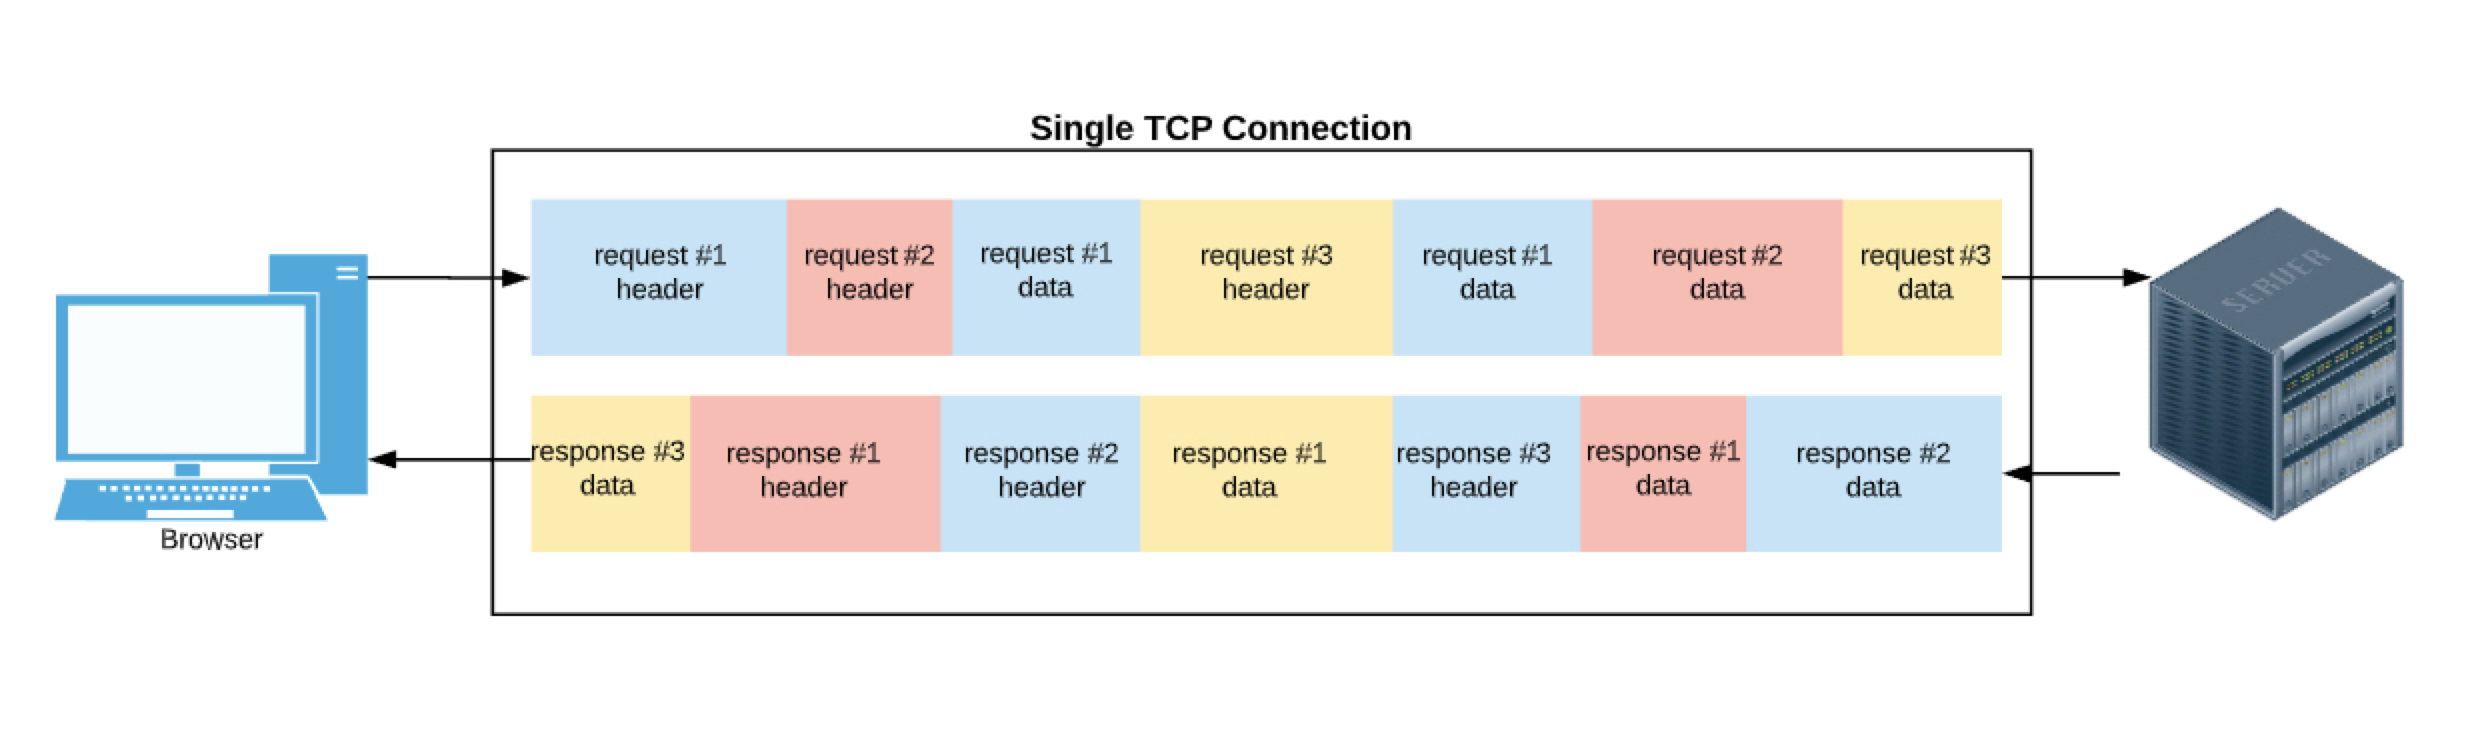 3 different requests multiplexed over a single TCP connection